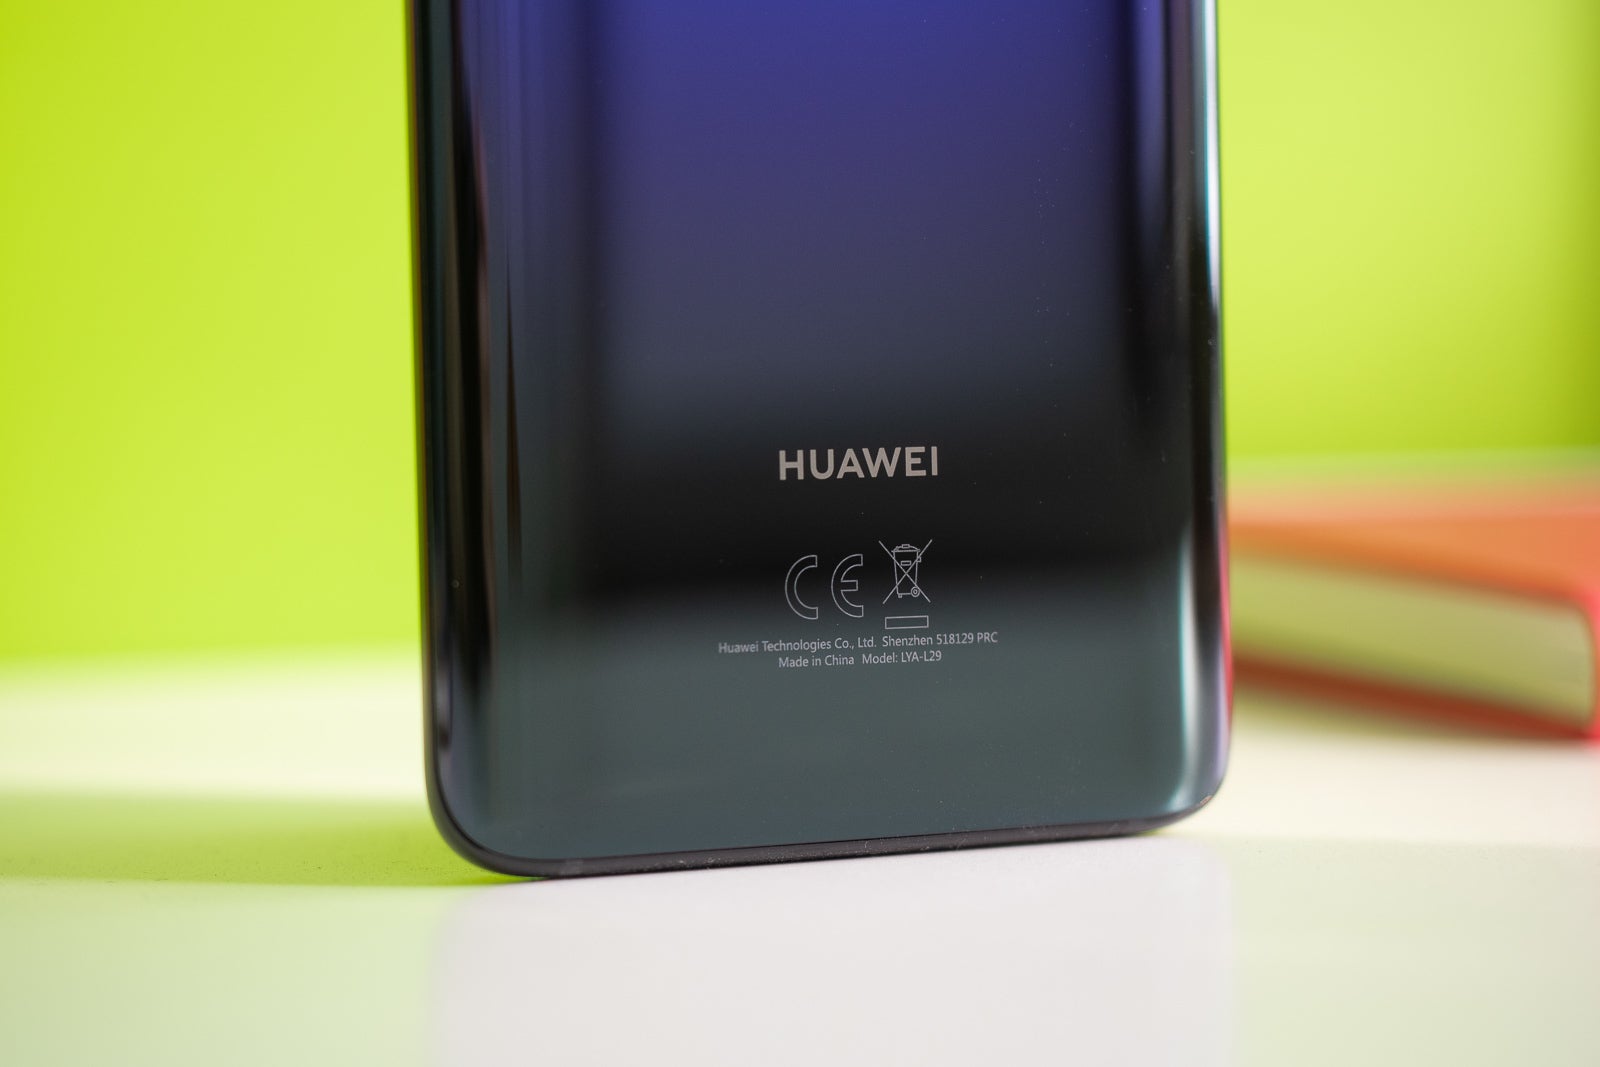 The Huawei Mate 20 Pro - The Huawei Mate 30 Pro has been spotted in public for the first time